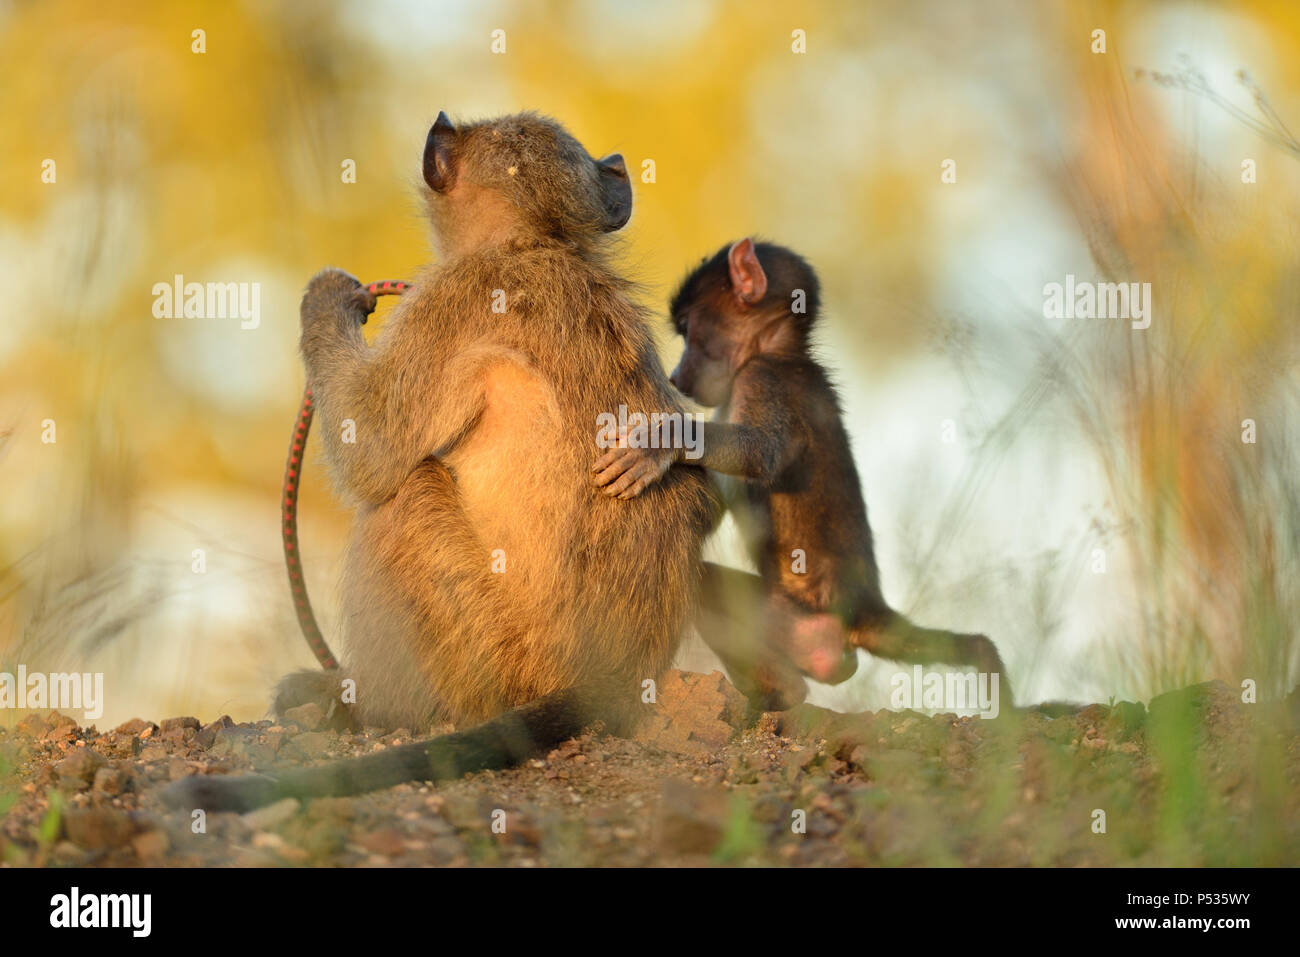 Baby baboon playing with older baboon Stock Photo